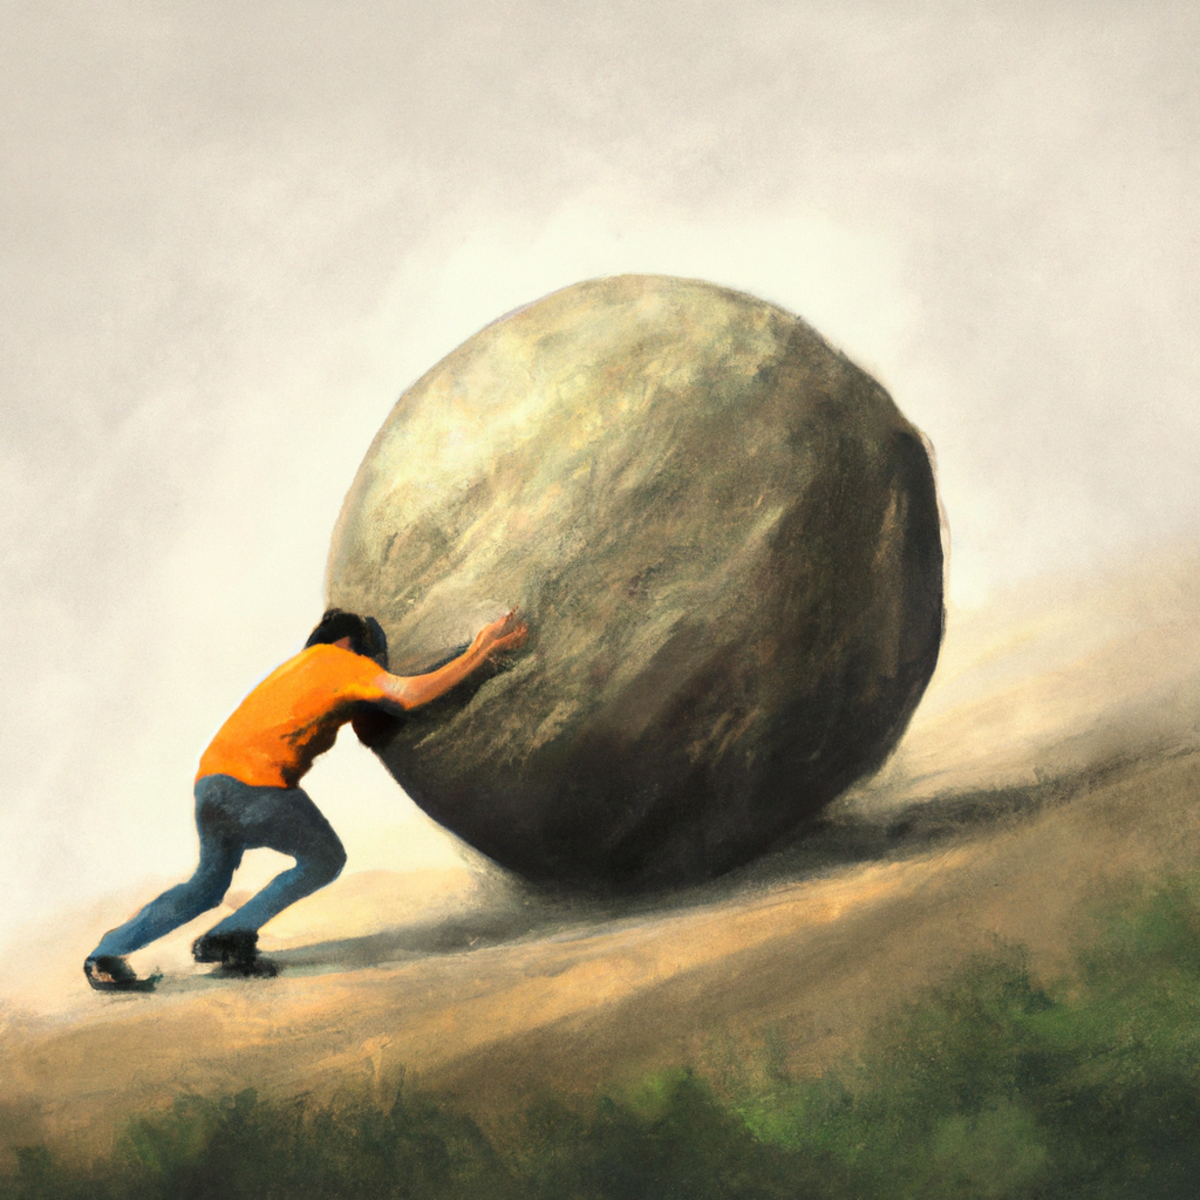 A person pushing a large boulder uphill, symbolizing the effort required for successful SEO.